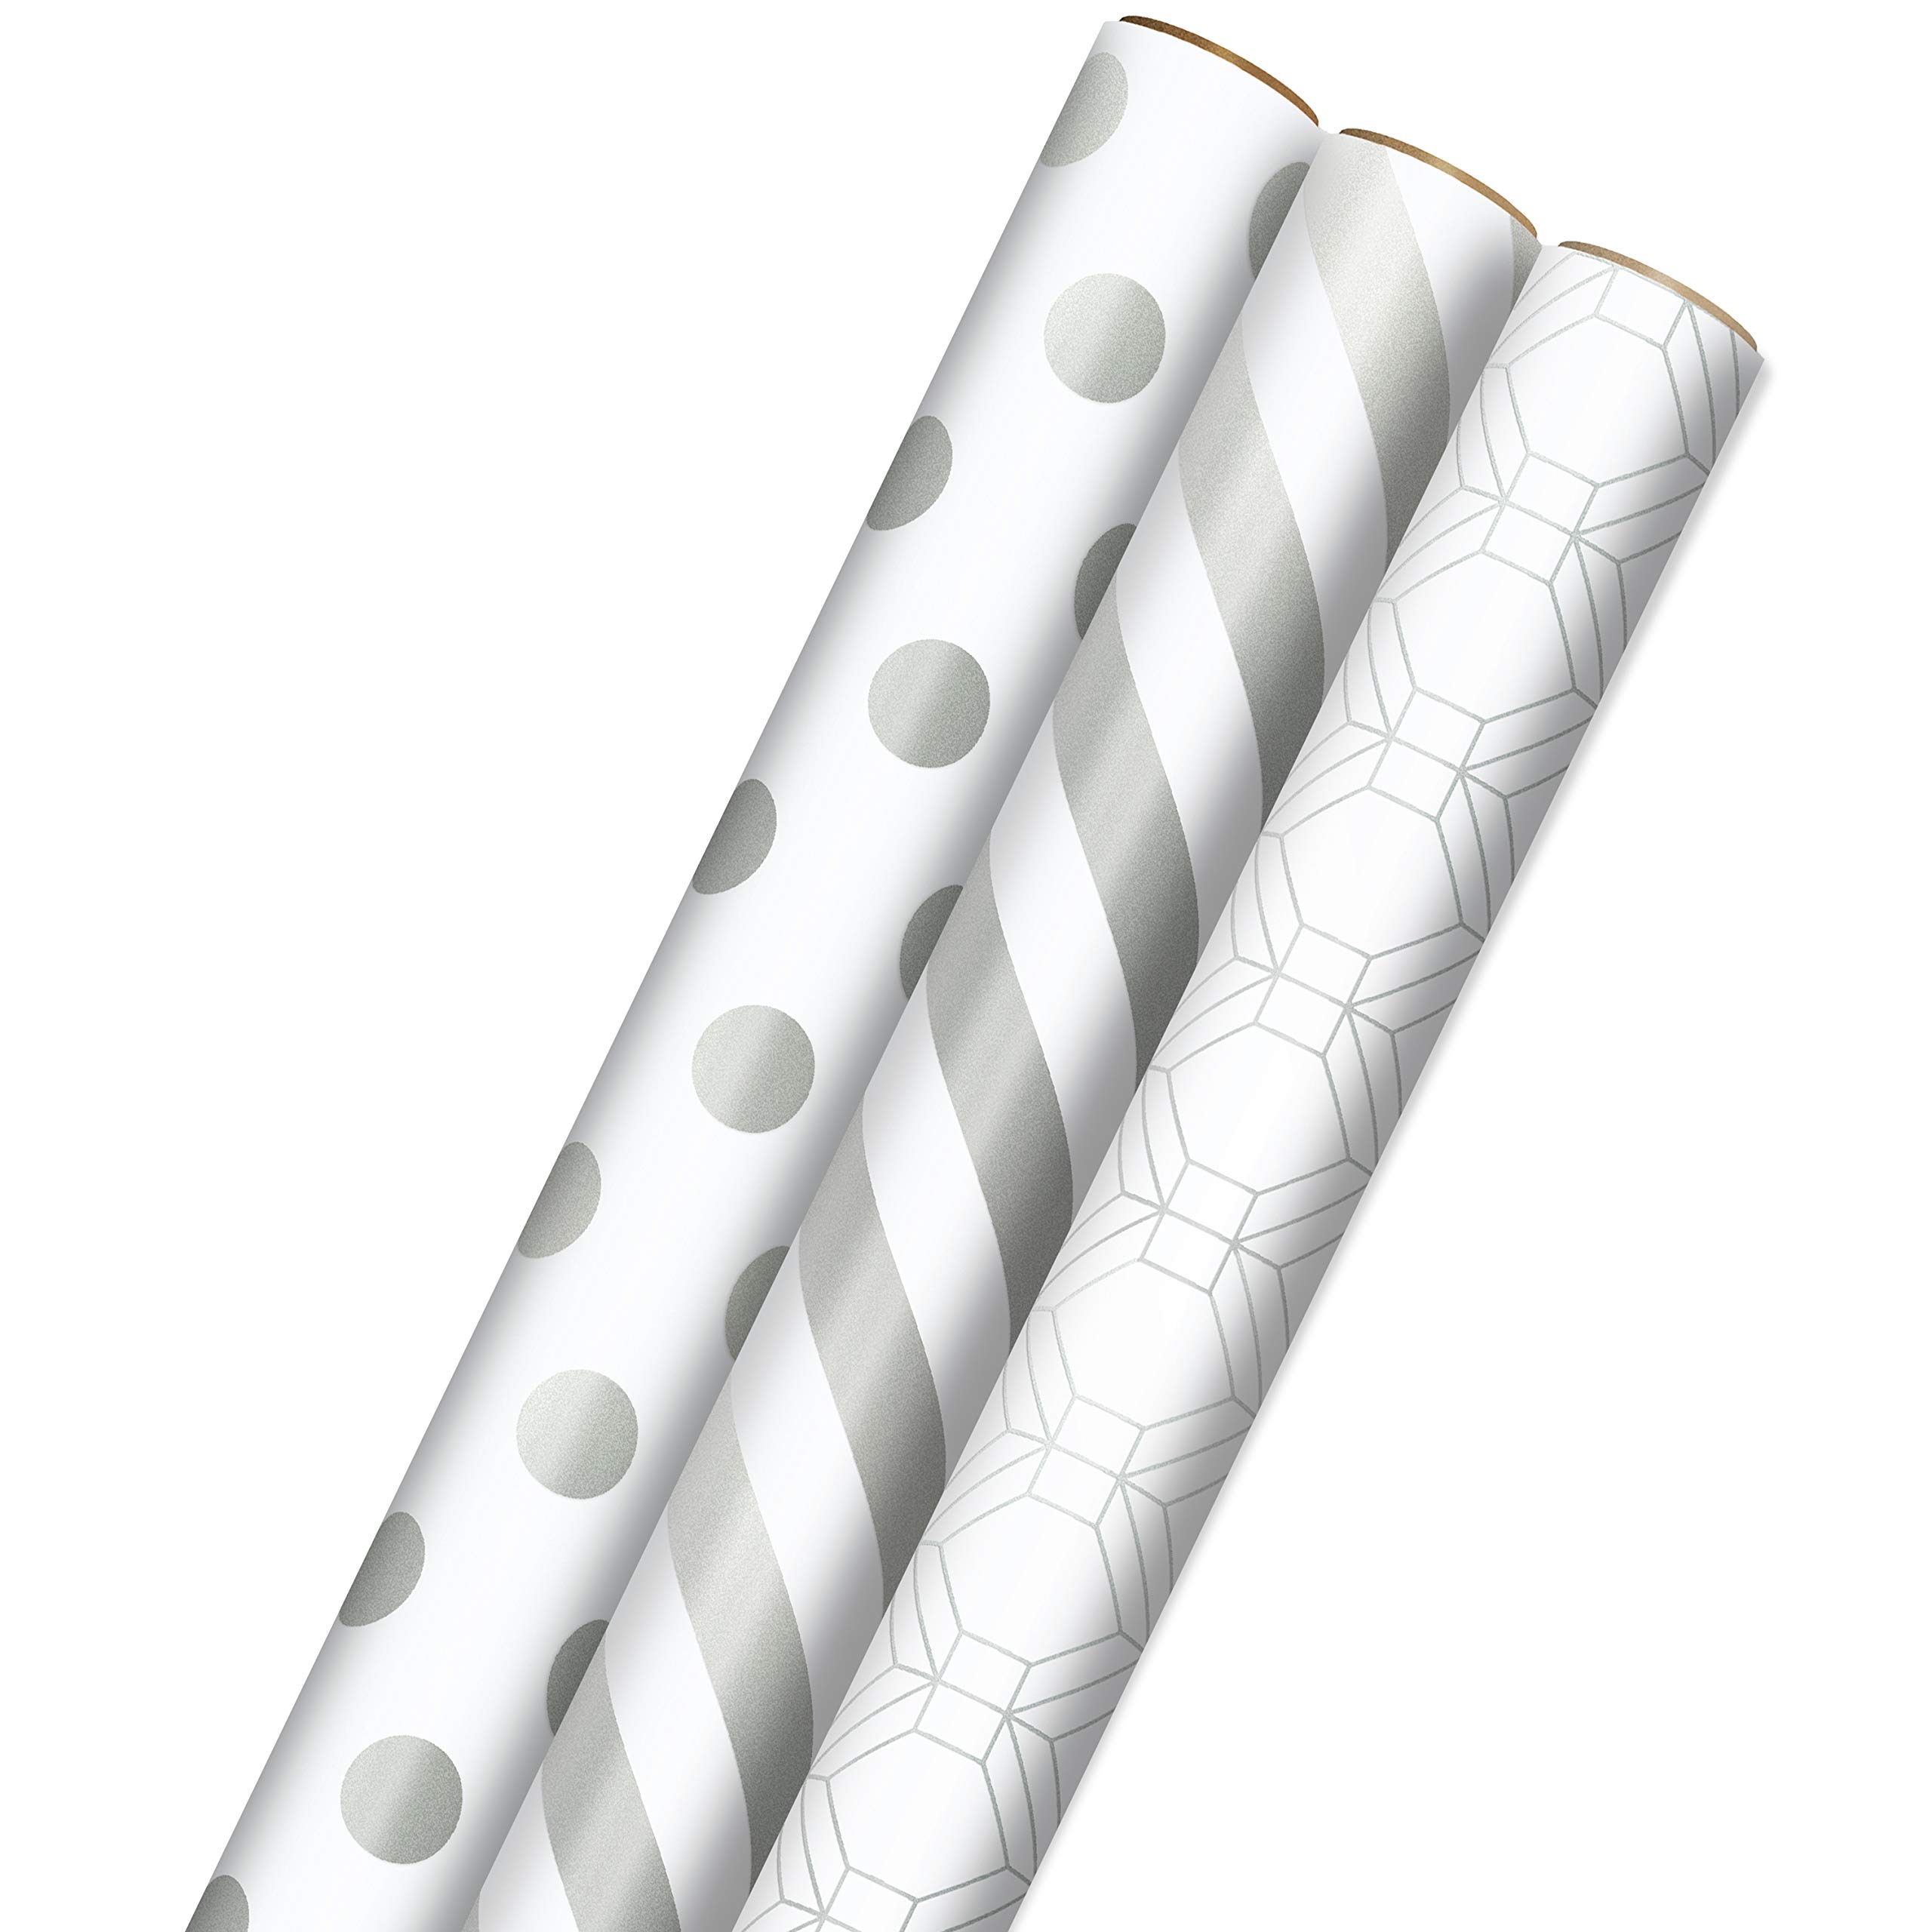 Hallmark Silver Wrapping Paper with Cut Lines on Reverse (3-Pack: 105 sq. ft. ttl) for Weddings, Christmas, Hanukkah, Bridal Showers, Birthdays